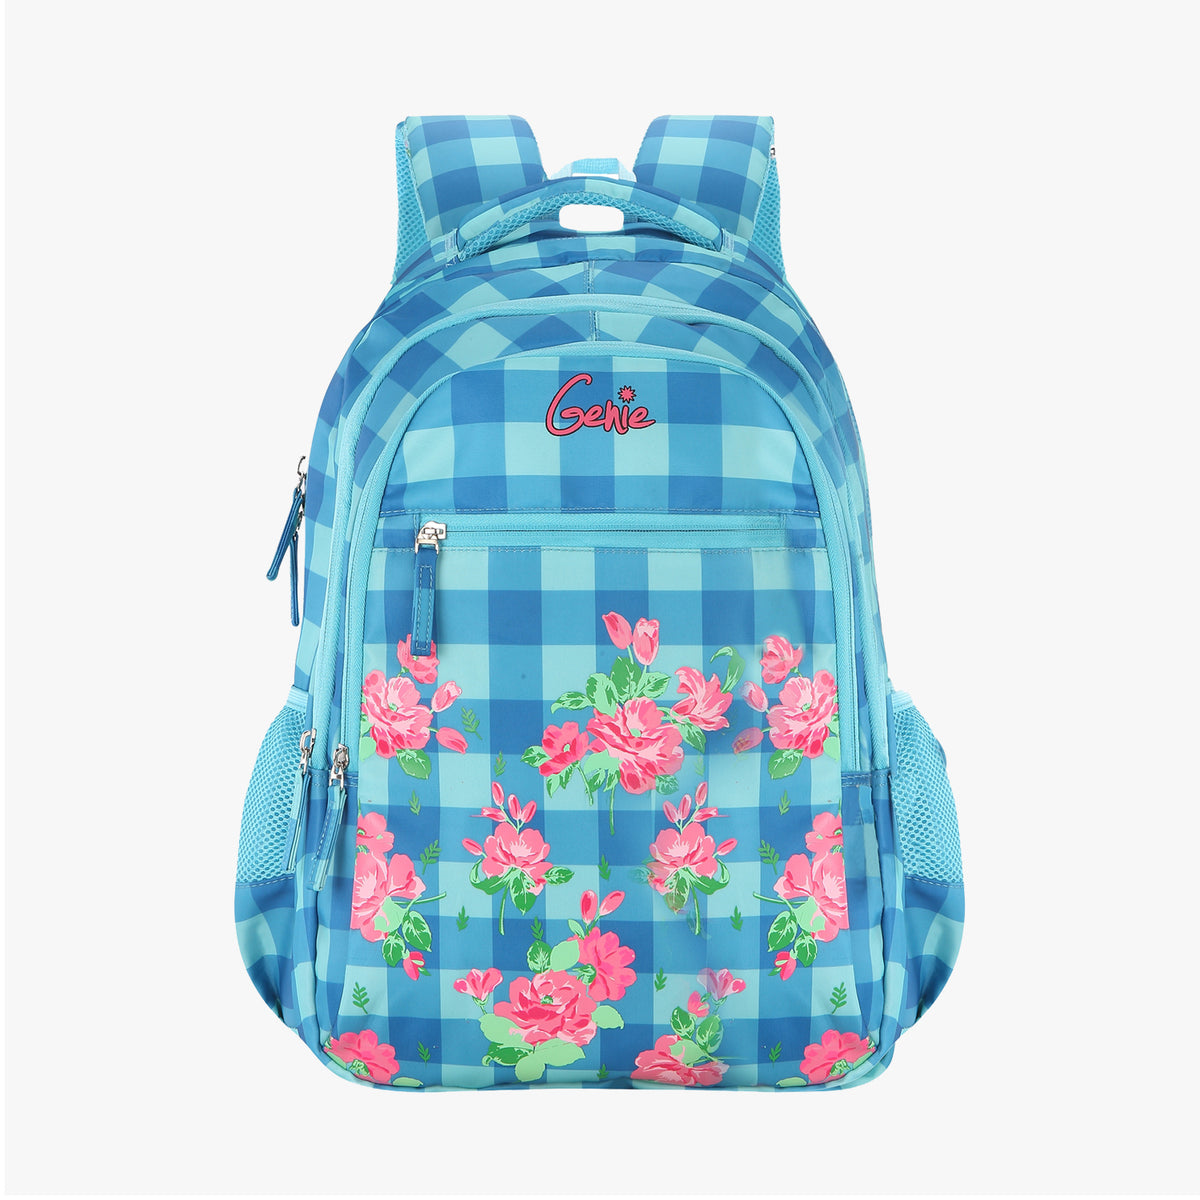 Genie Primrose 36L Blue School Backpack With Easy Access Pockets